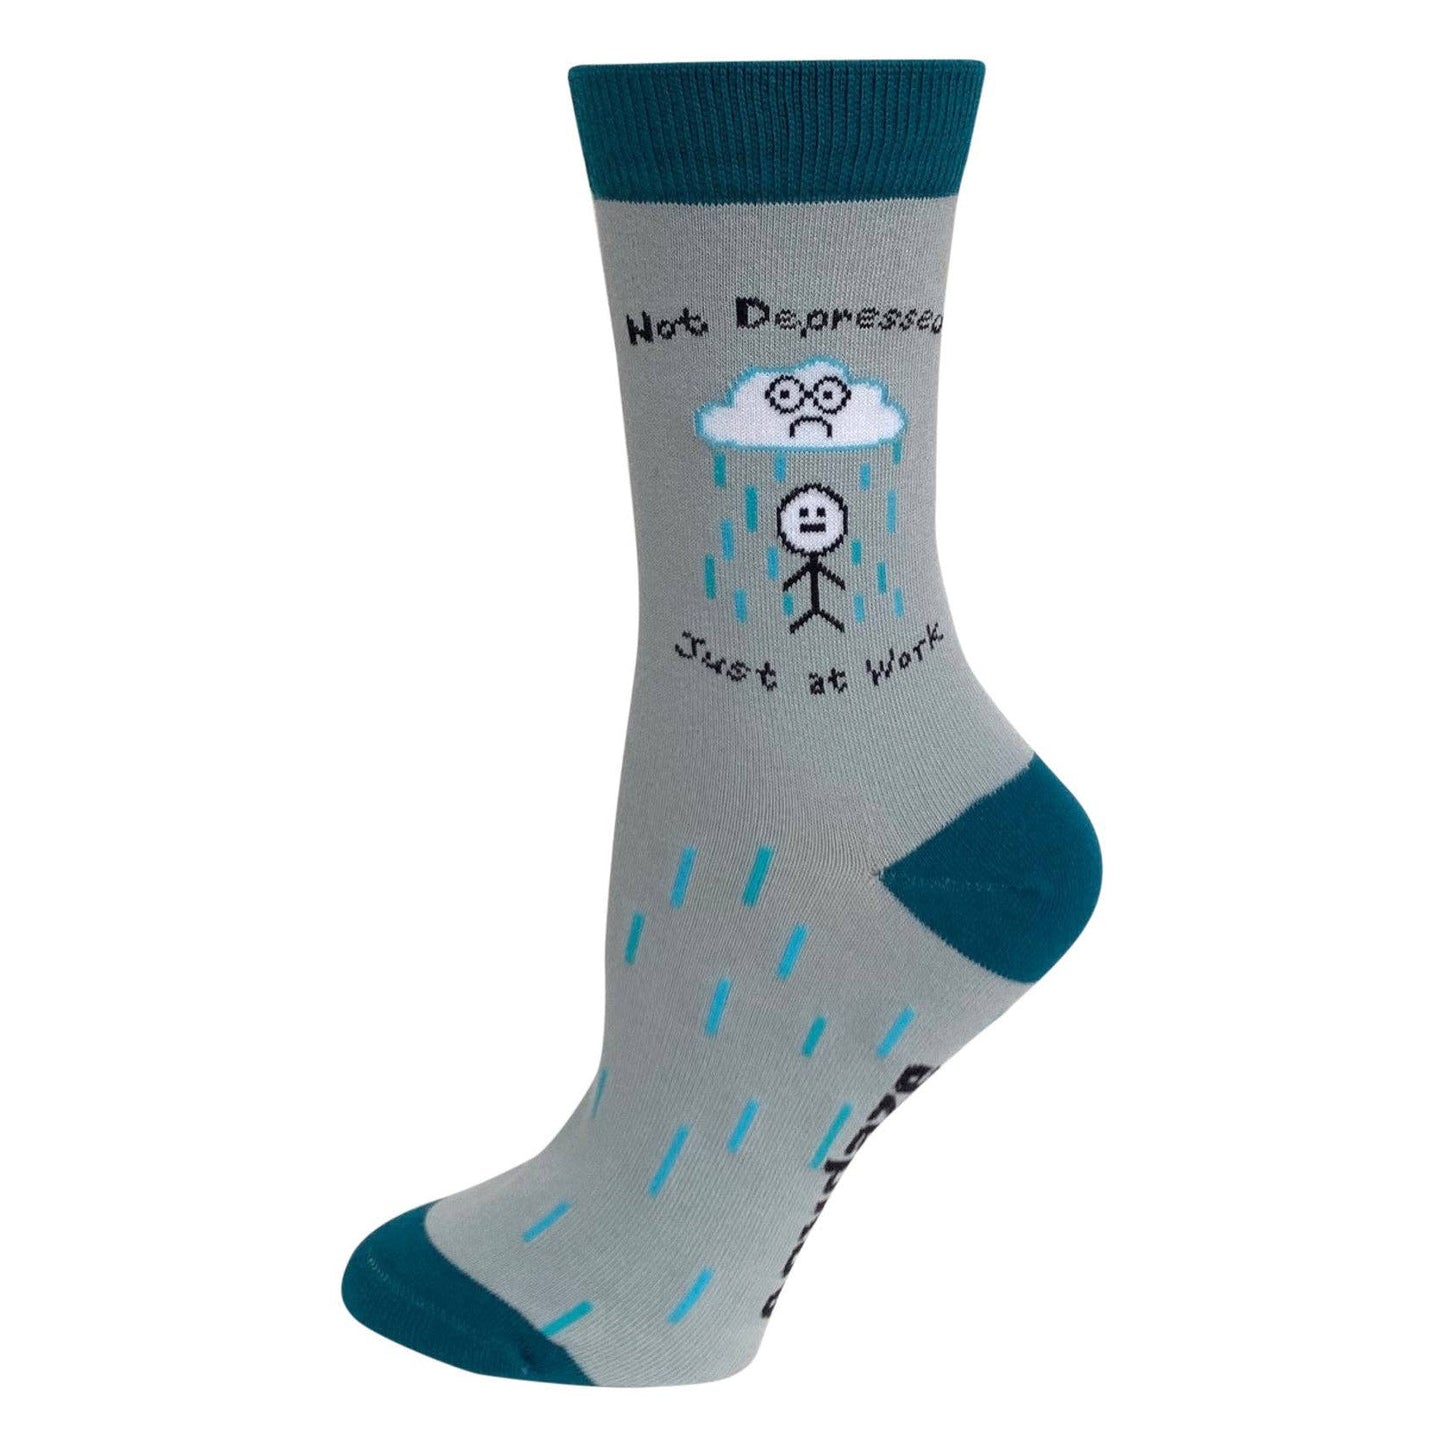 Not Depressed, Just at Work Women's Crew Socks | Gray and Blue Hues